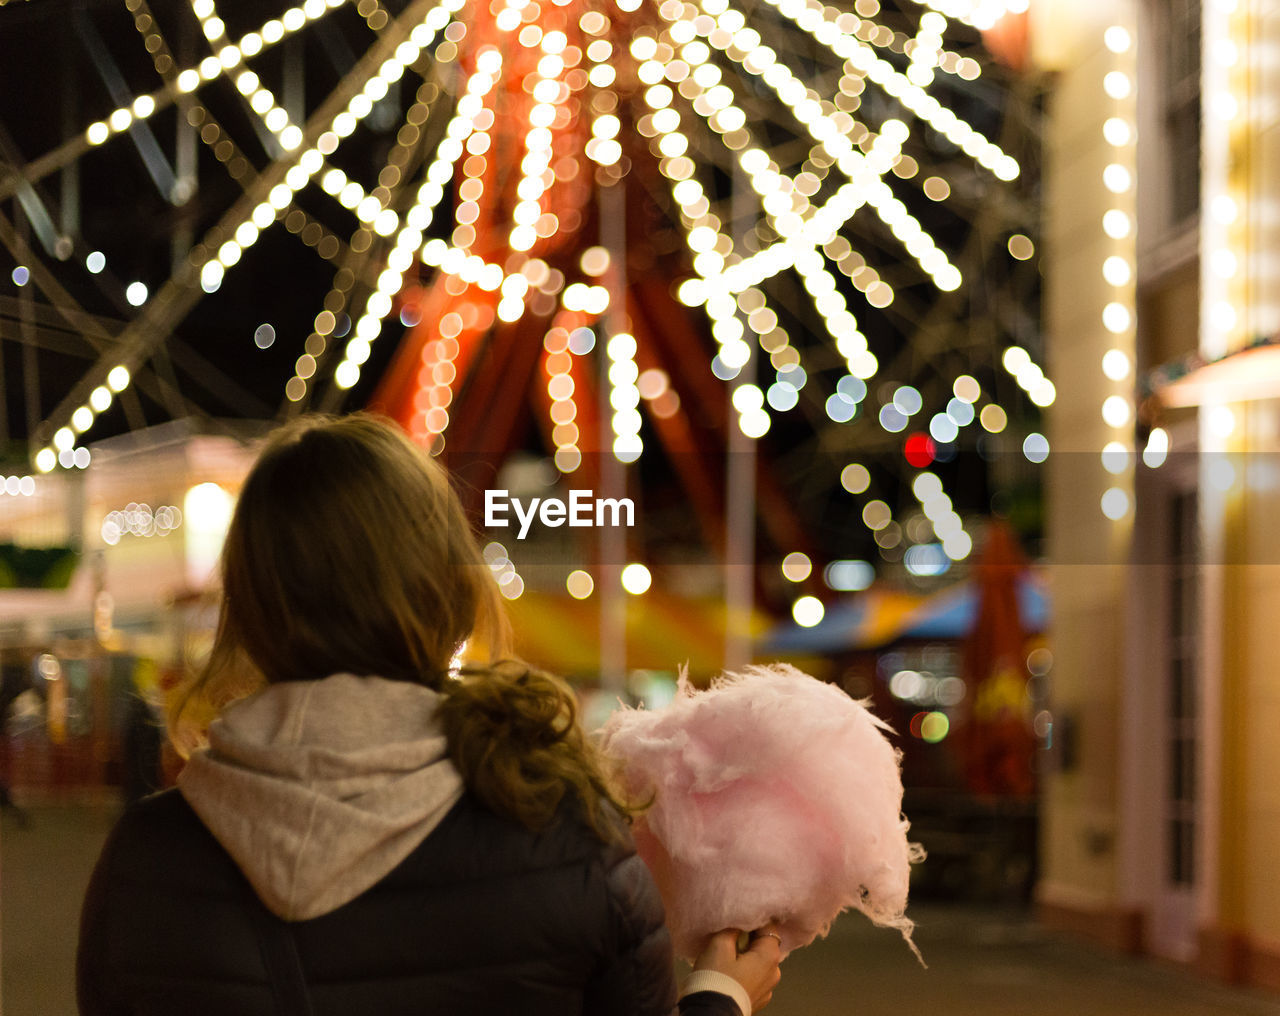 Rear view of woman holding cotton candy against illuminated ferris wheel at night